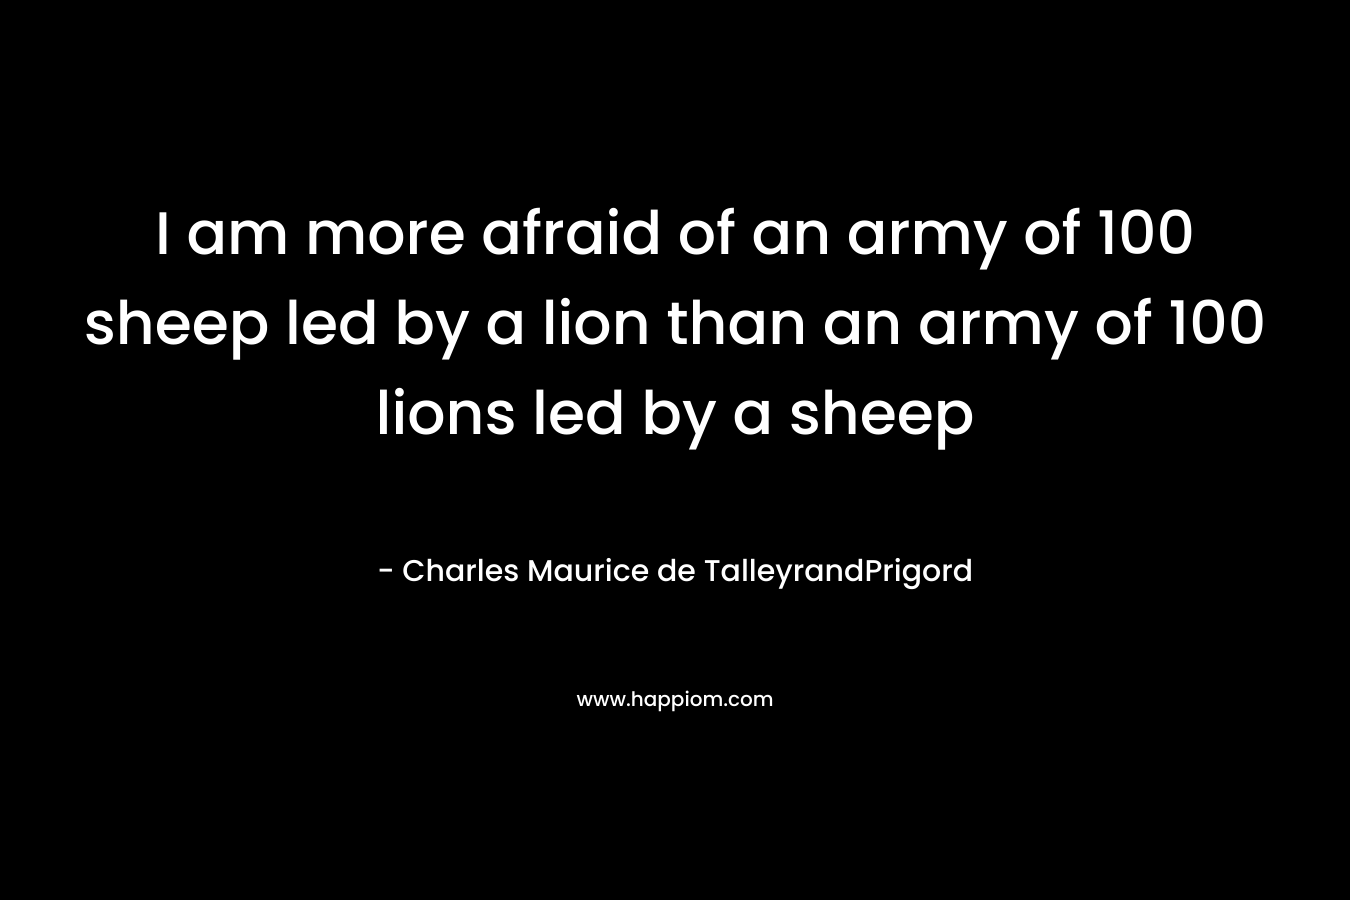 I am more afraid of an army of 100 sheep led by a lion than an army of 100 lions led by a sheep – Charles Maurice de TalleyrandPrigord